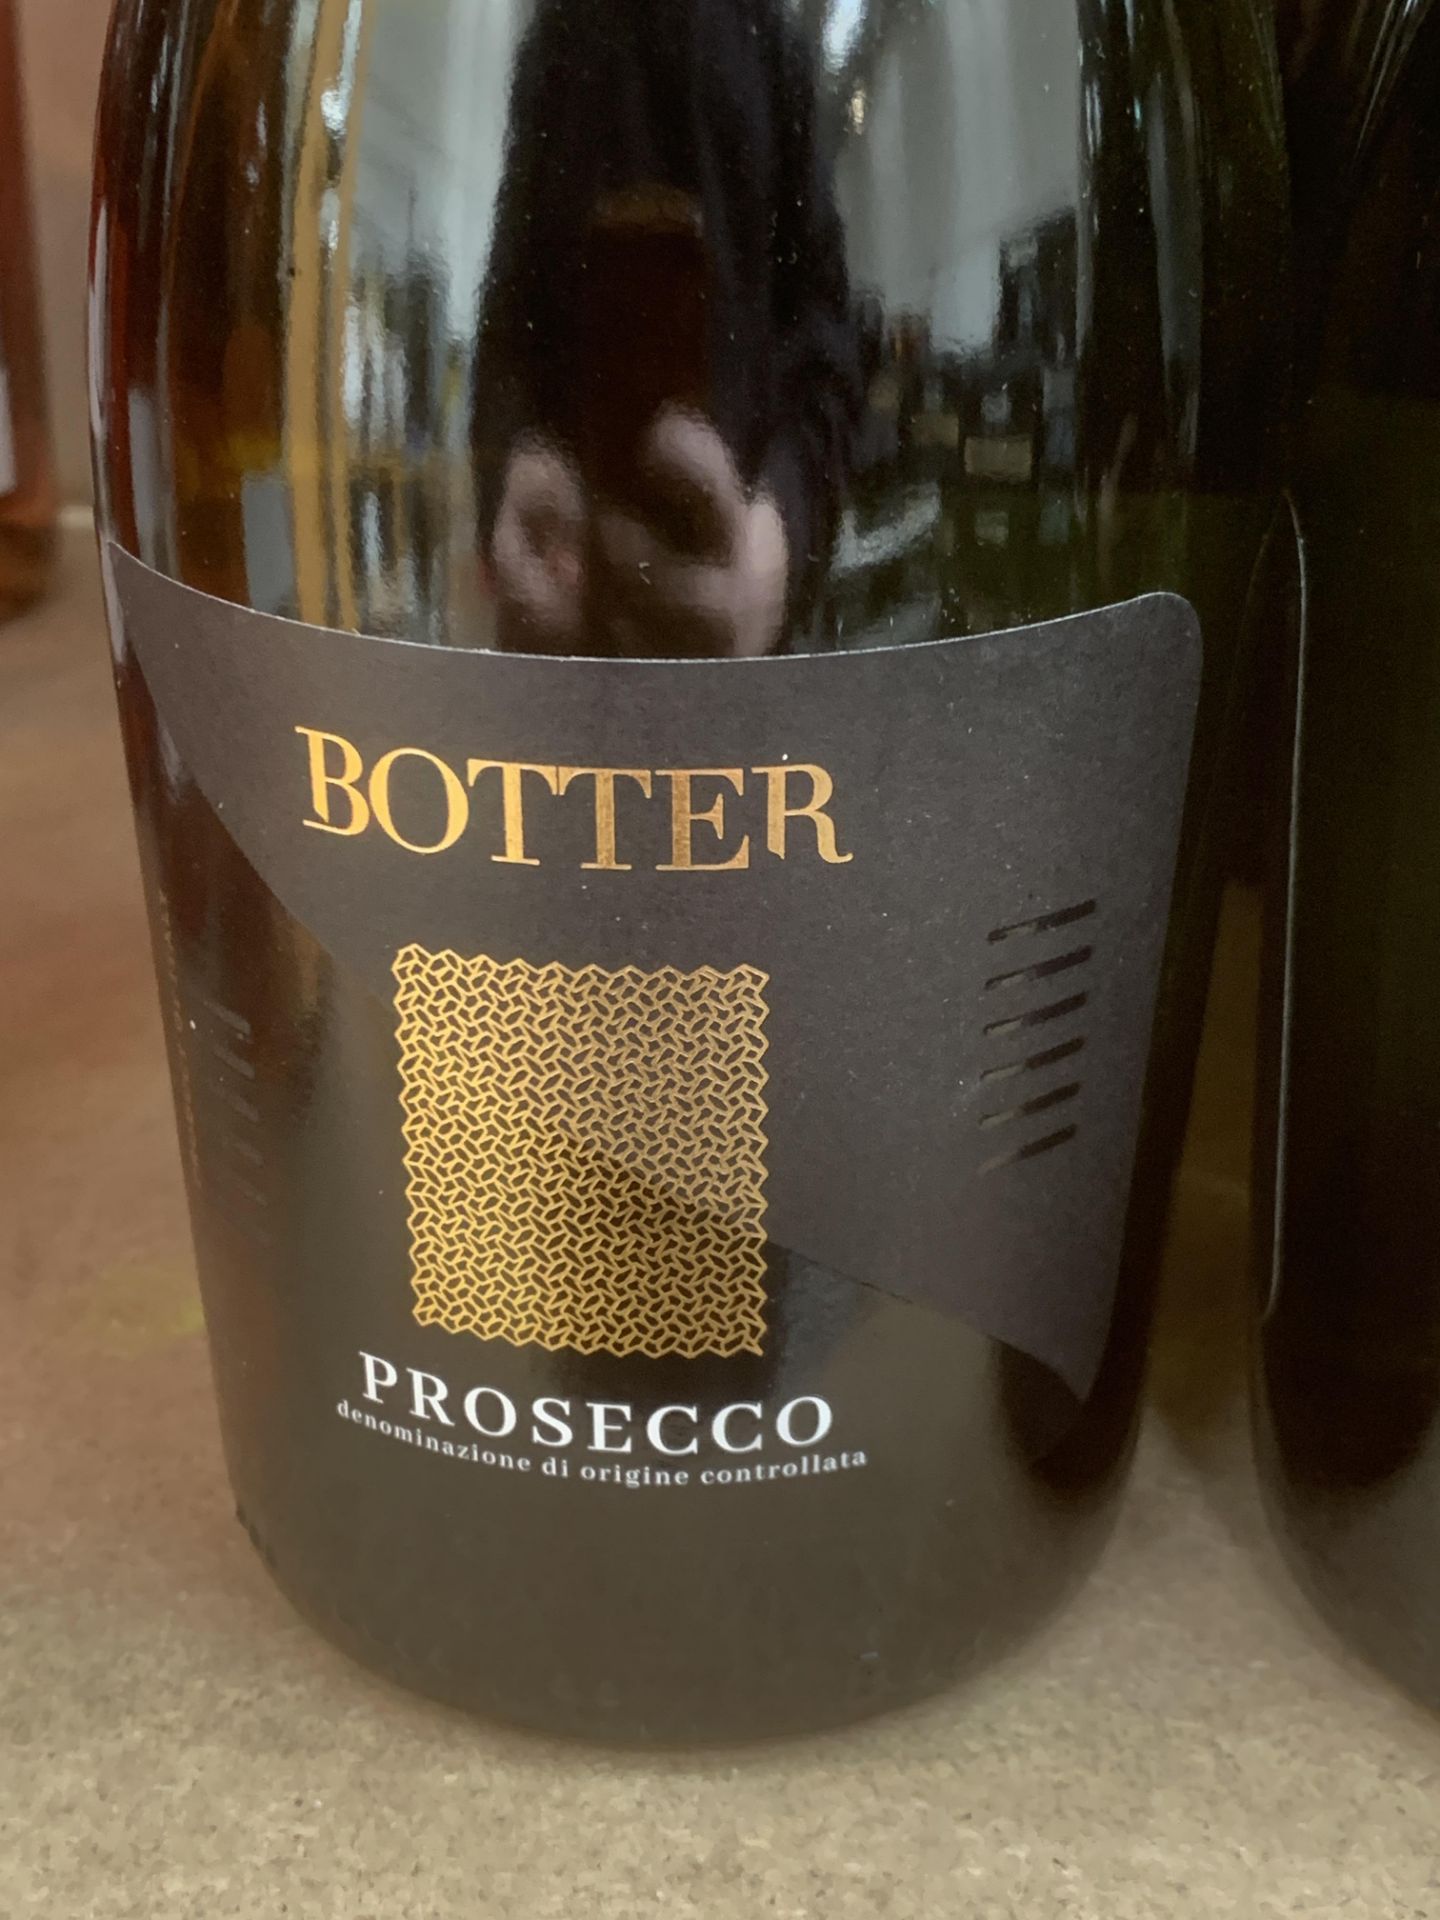 8 x bottles of Botter Prosecco - Image 2 of 3